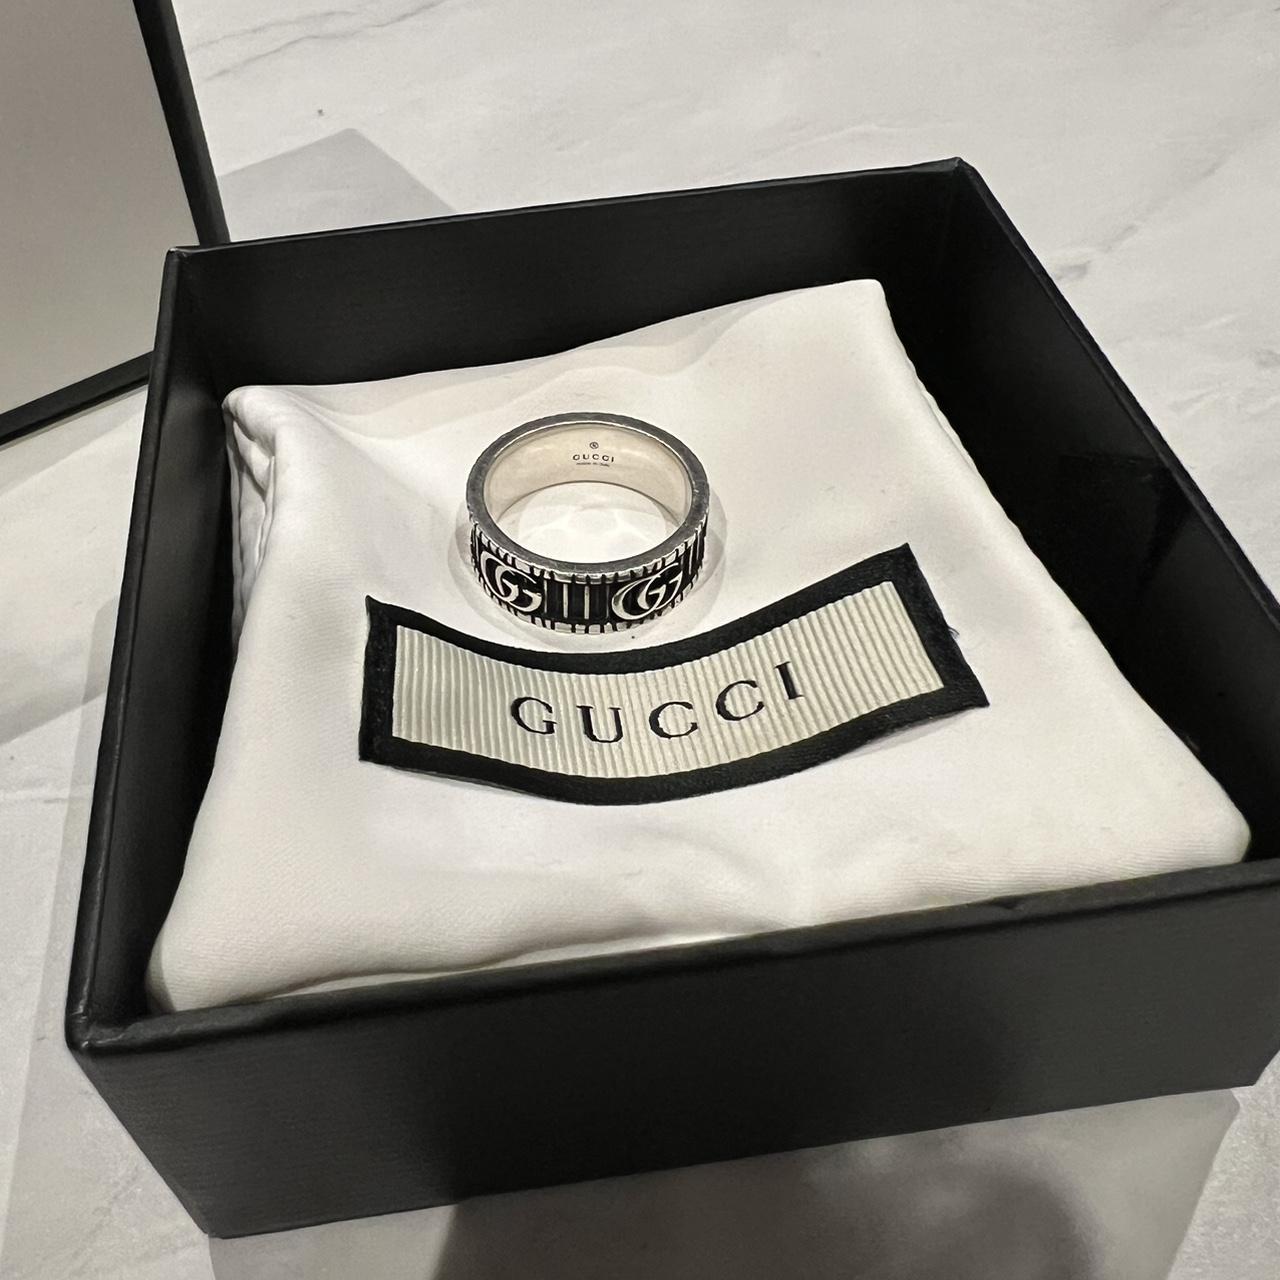 Mens double G Gucci ring in silver - Depop